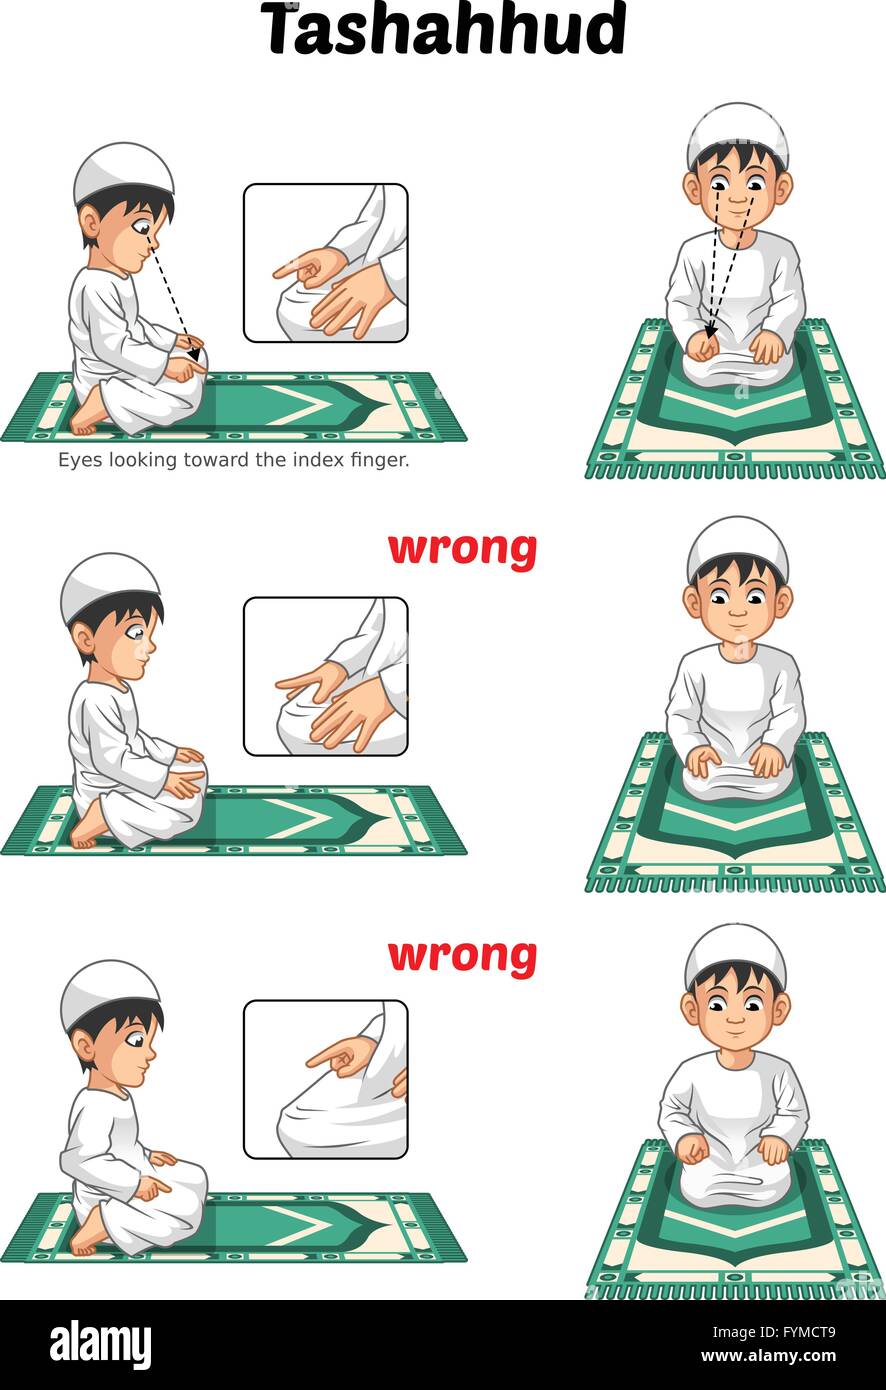 Examples Of Muslim Prayer Positions